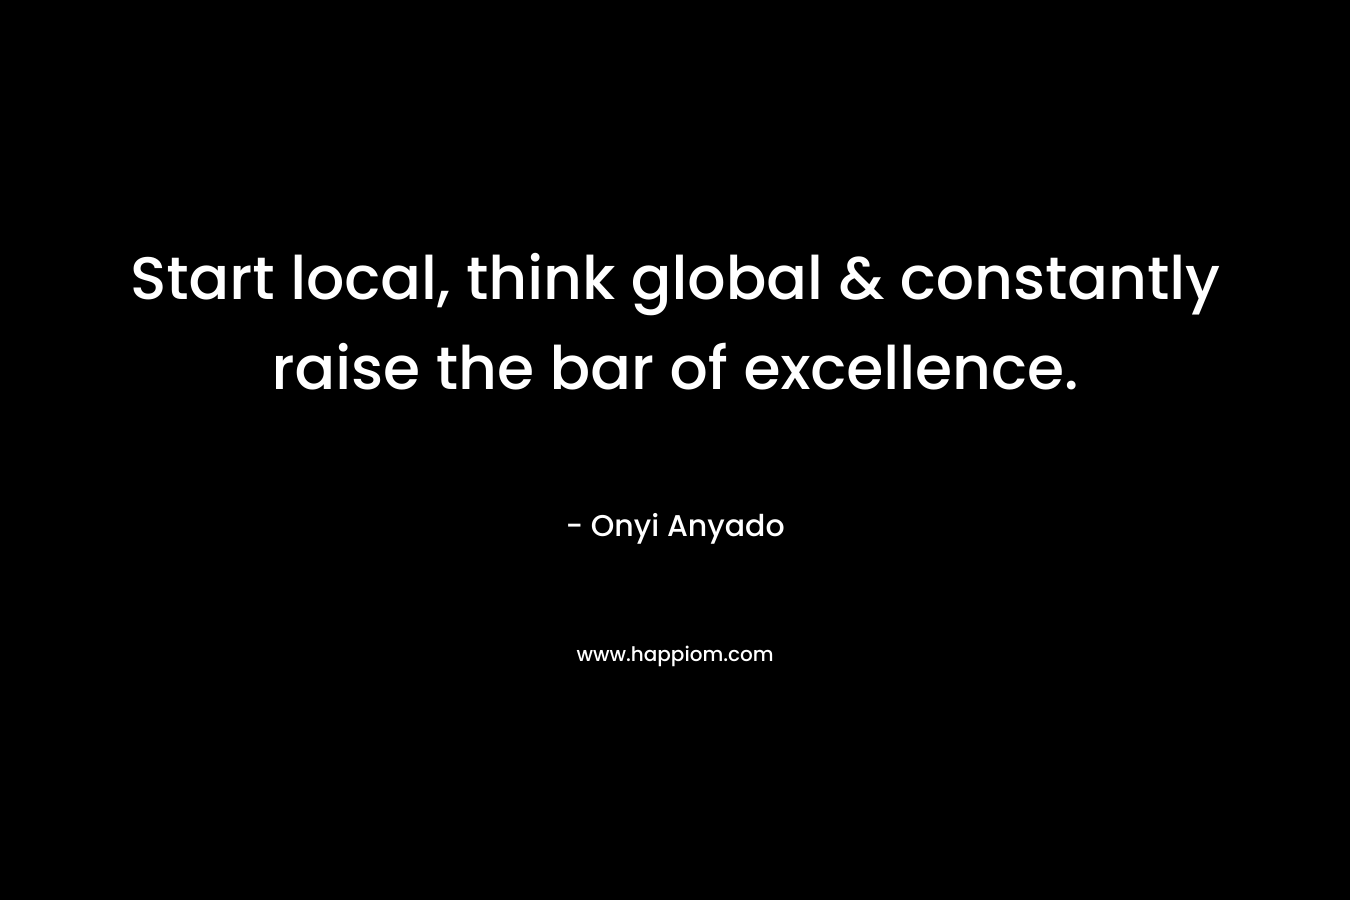 Start local, think global & constantly raise the bar of excellence.